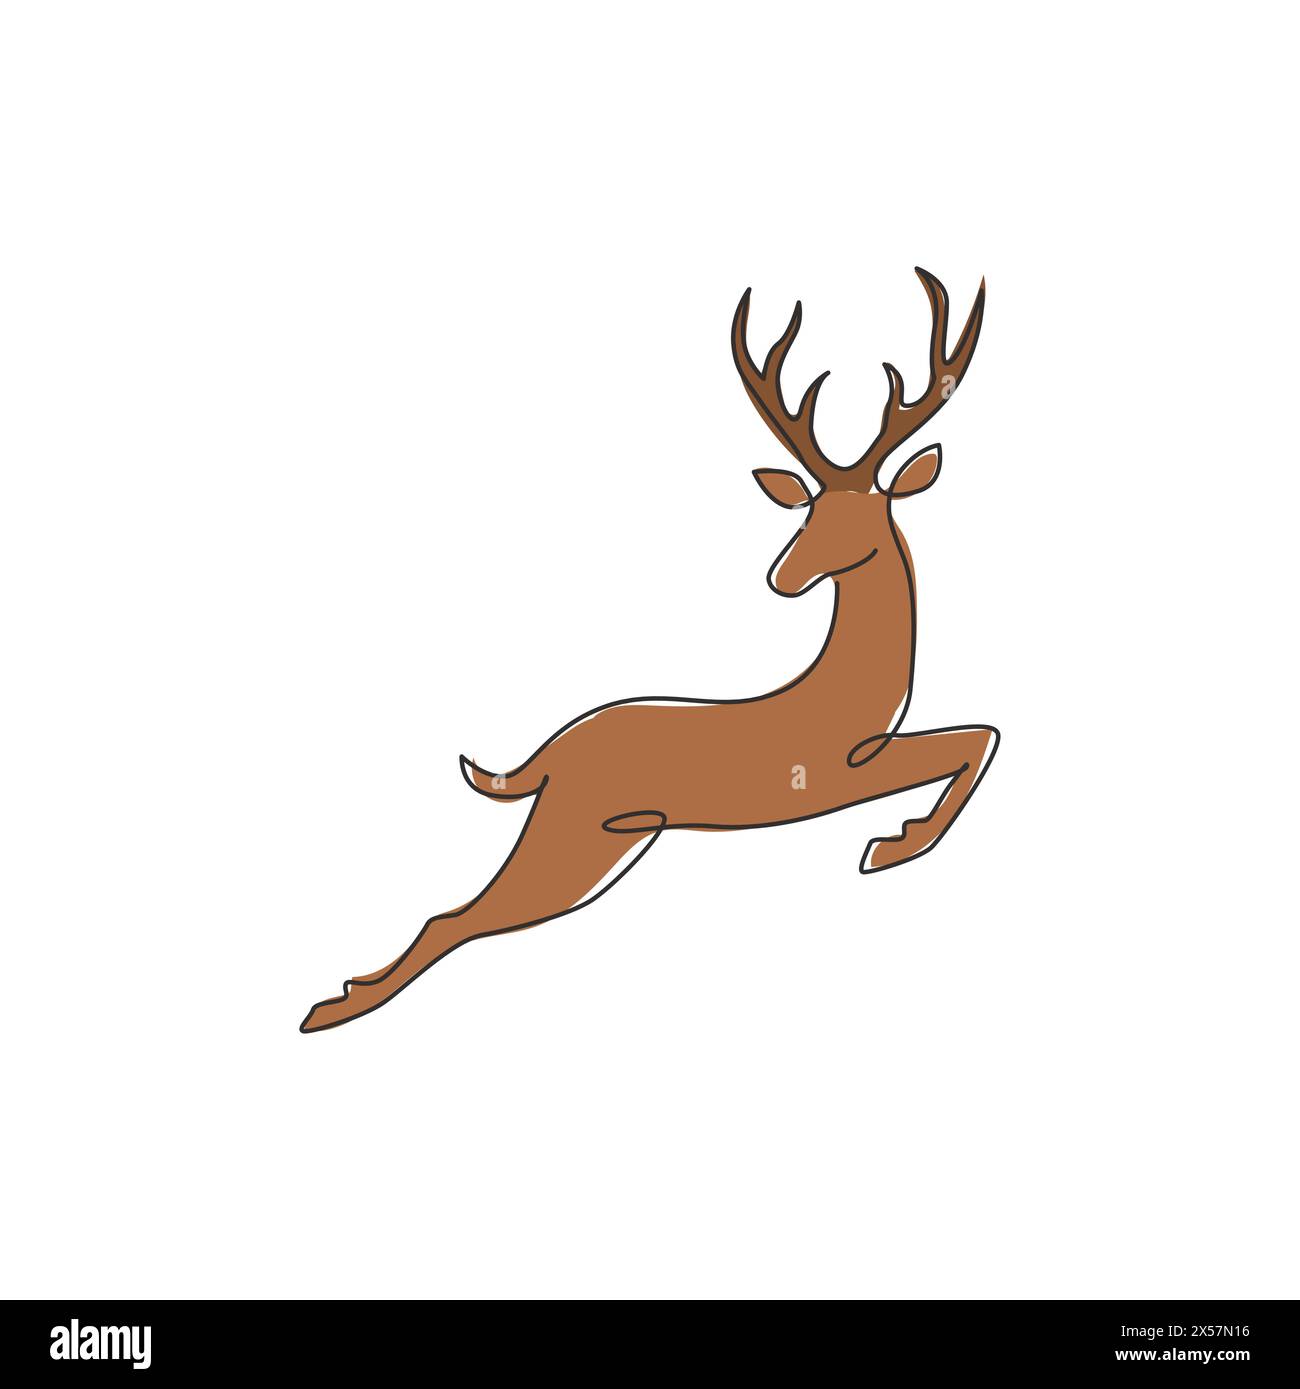 One continuous line drawing of wild reindeer for national park logo identity. Elegant buck mammal animal mascot concept for nature conservation. Singl Stock Vector